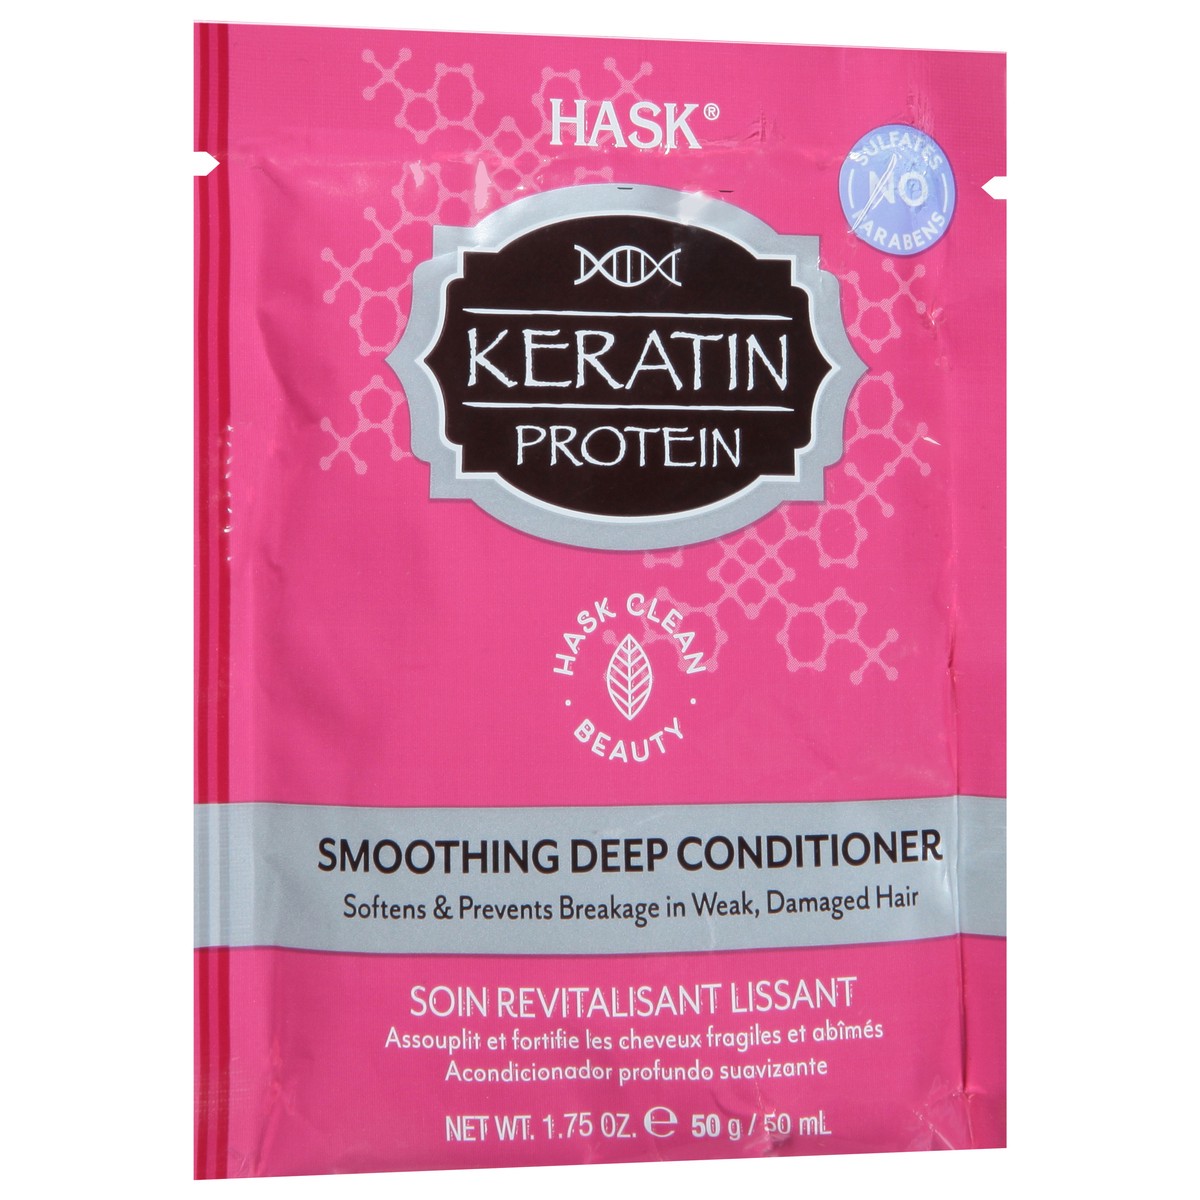 slide 2 of 9, Hask Keratin Protein Smoothing Deep Conditioner 1.75 oz, 1.75 oz